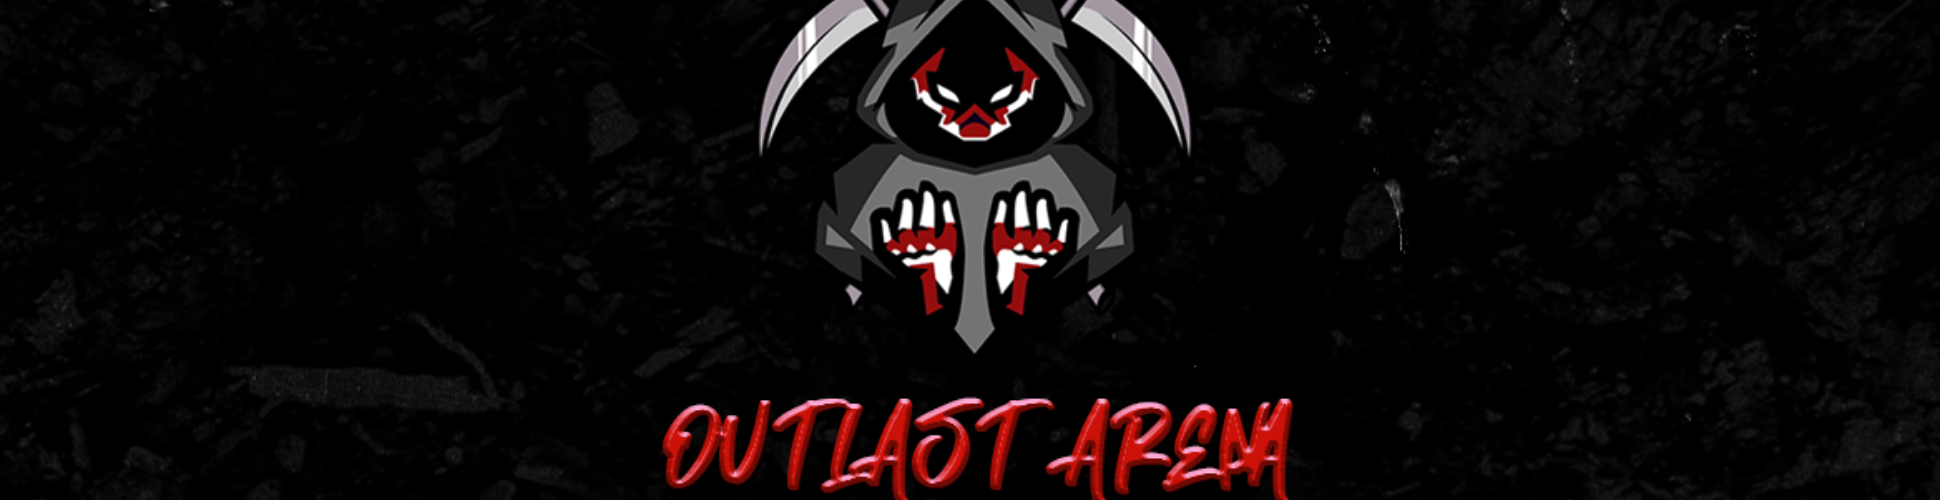 Outlast Arena Open Qualifier 2